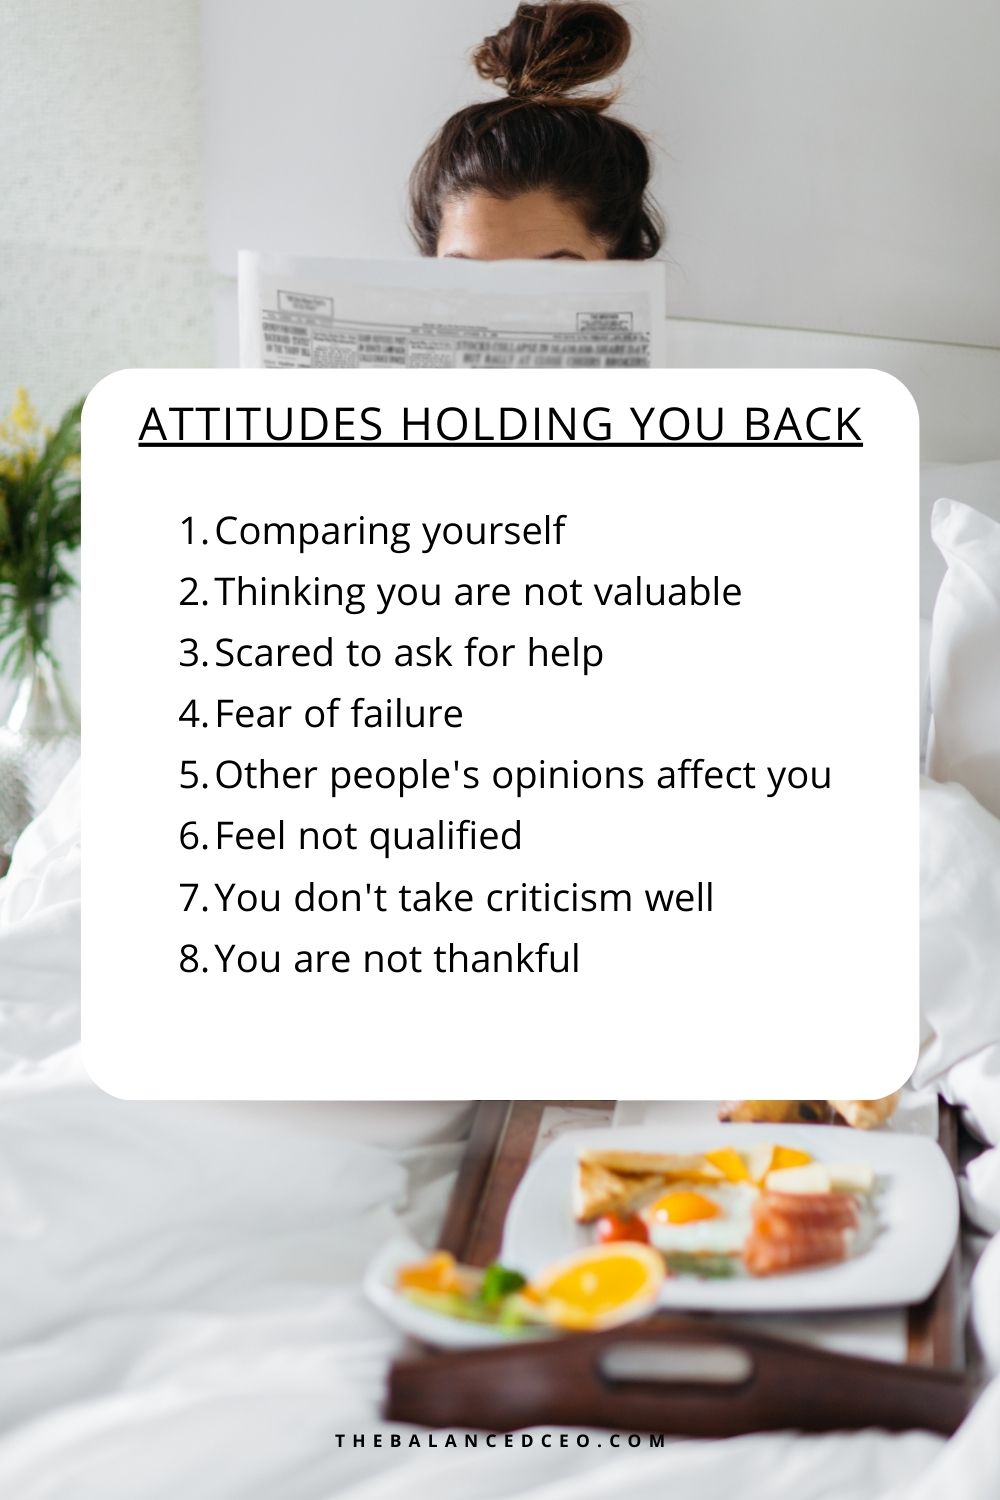 10 Attitudes That Are Holding You Back in Your Business